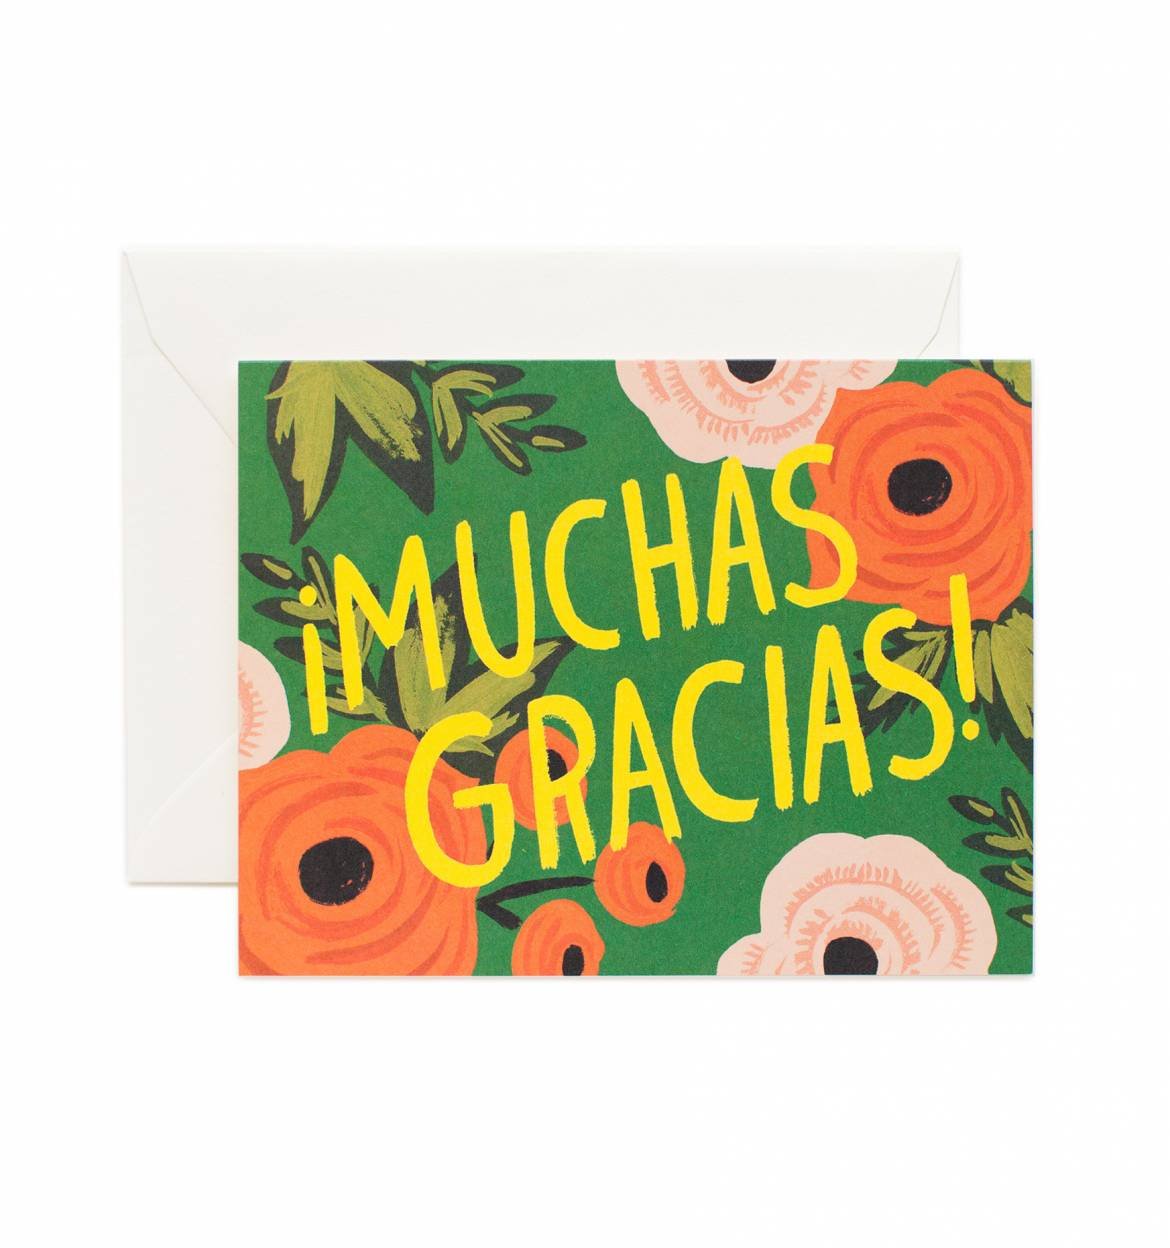 Thank-You cards